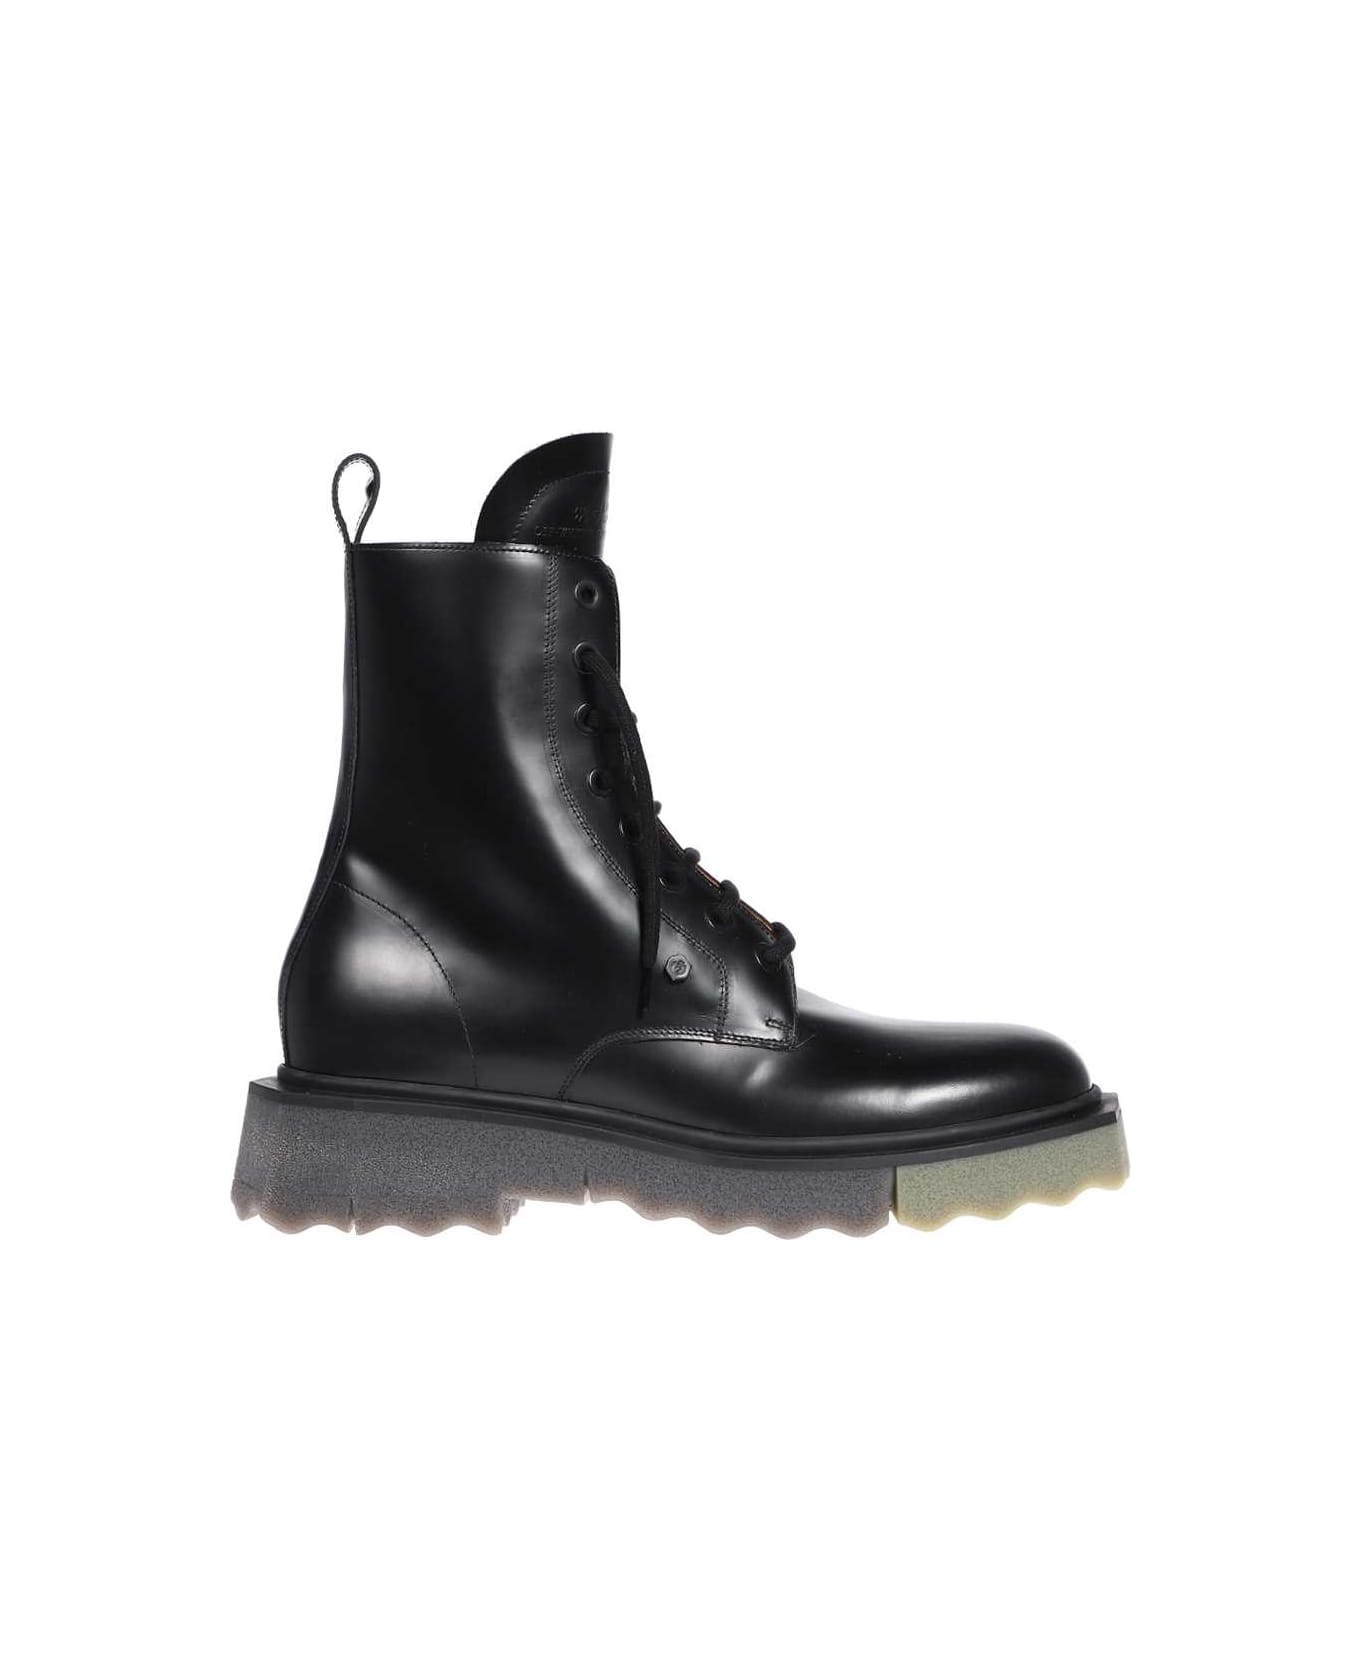 Off-White Leather Lace-up Boots - black ブーツ